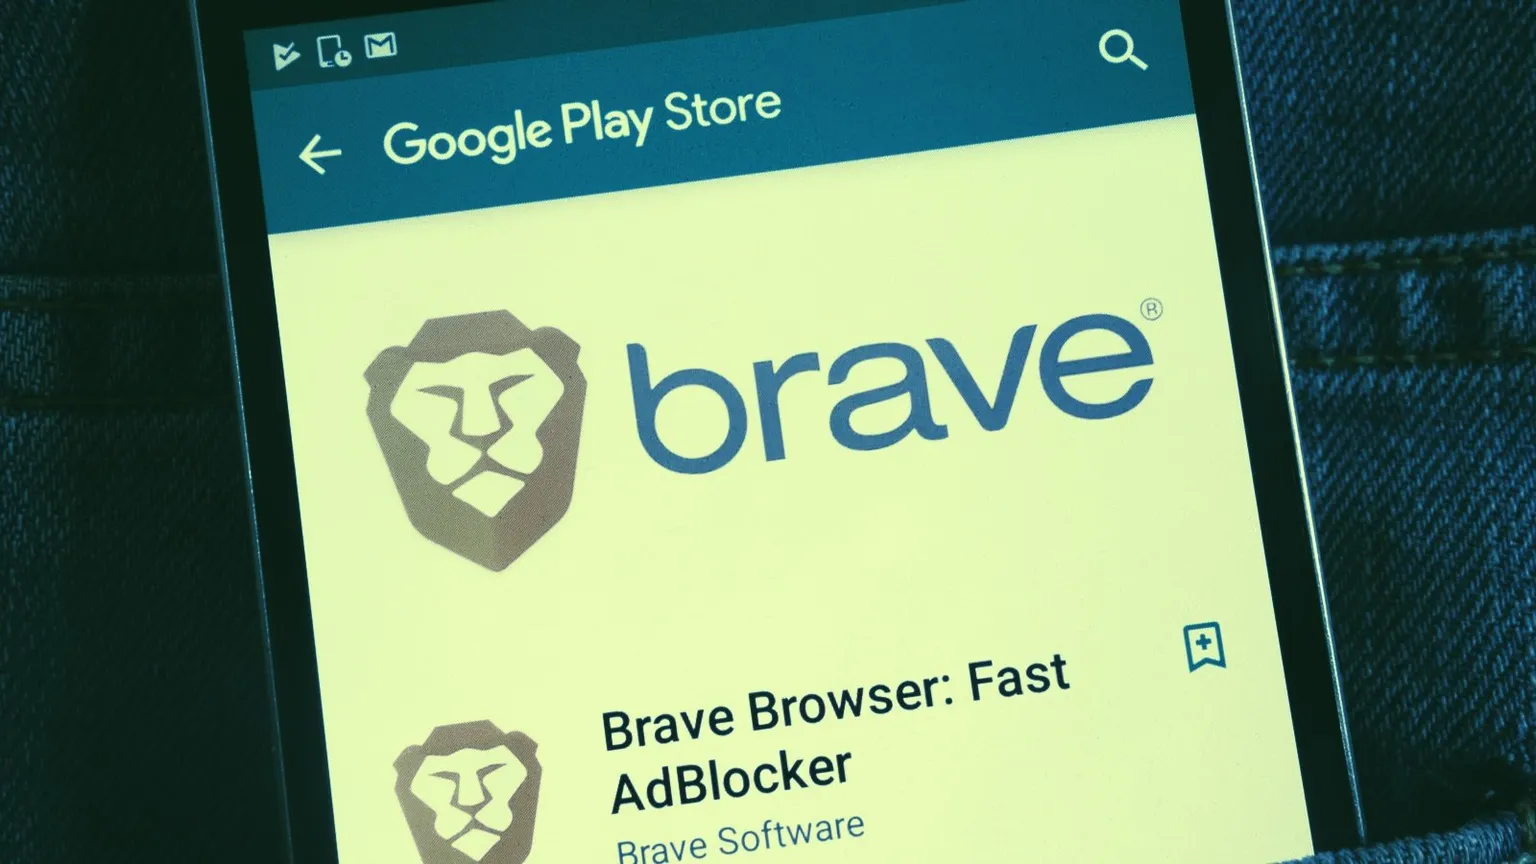 Brave is a popular web browser Image: Shutterstock